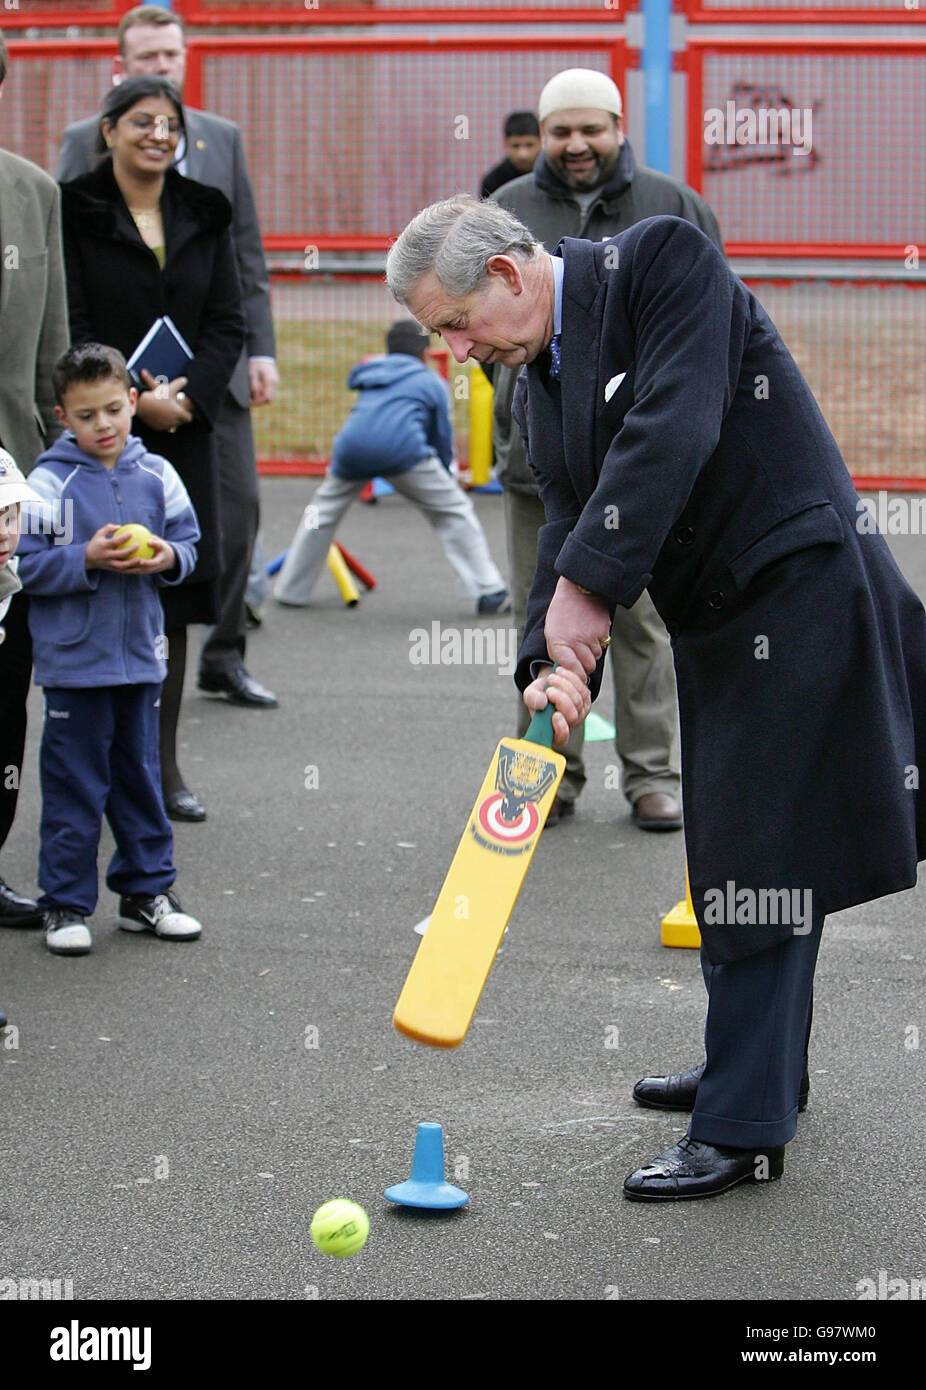 Britain's Prince of Wales plays cricket while visiting a playground in the Queen's Park area of Bedford, Monday March 6, 2006. Prince Charles visited the neighbourhood to see how different faith communities in Bedford are working together to engage children from all faiths. See PA story ROYAL Charles. PRESS ASSOCIATION photo. Photo credit should read: Odd Andersen/AFP/WPA rota/PA. Stock Photo